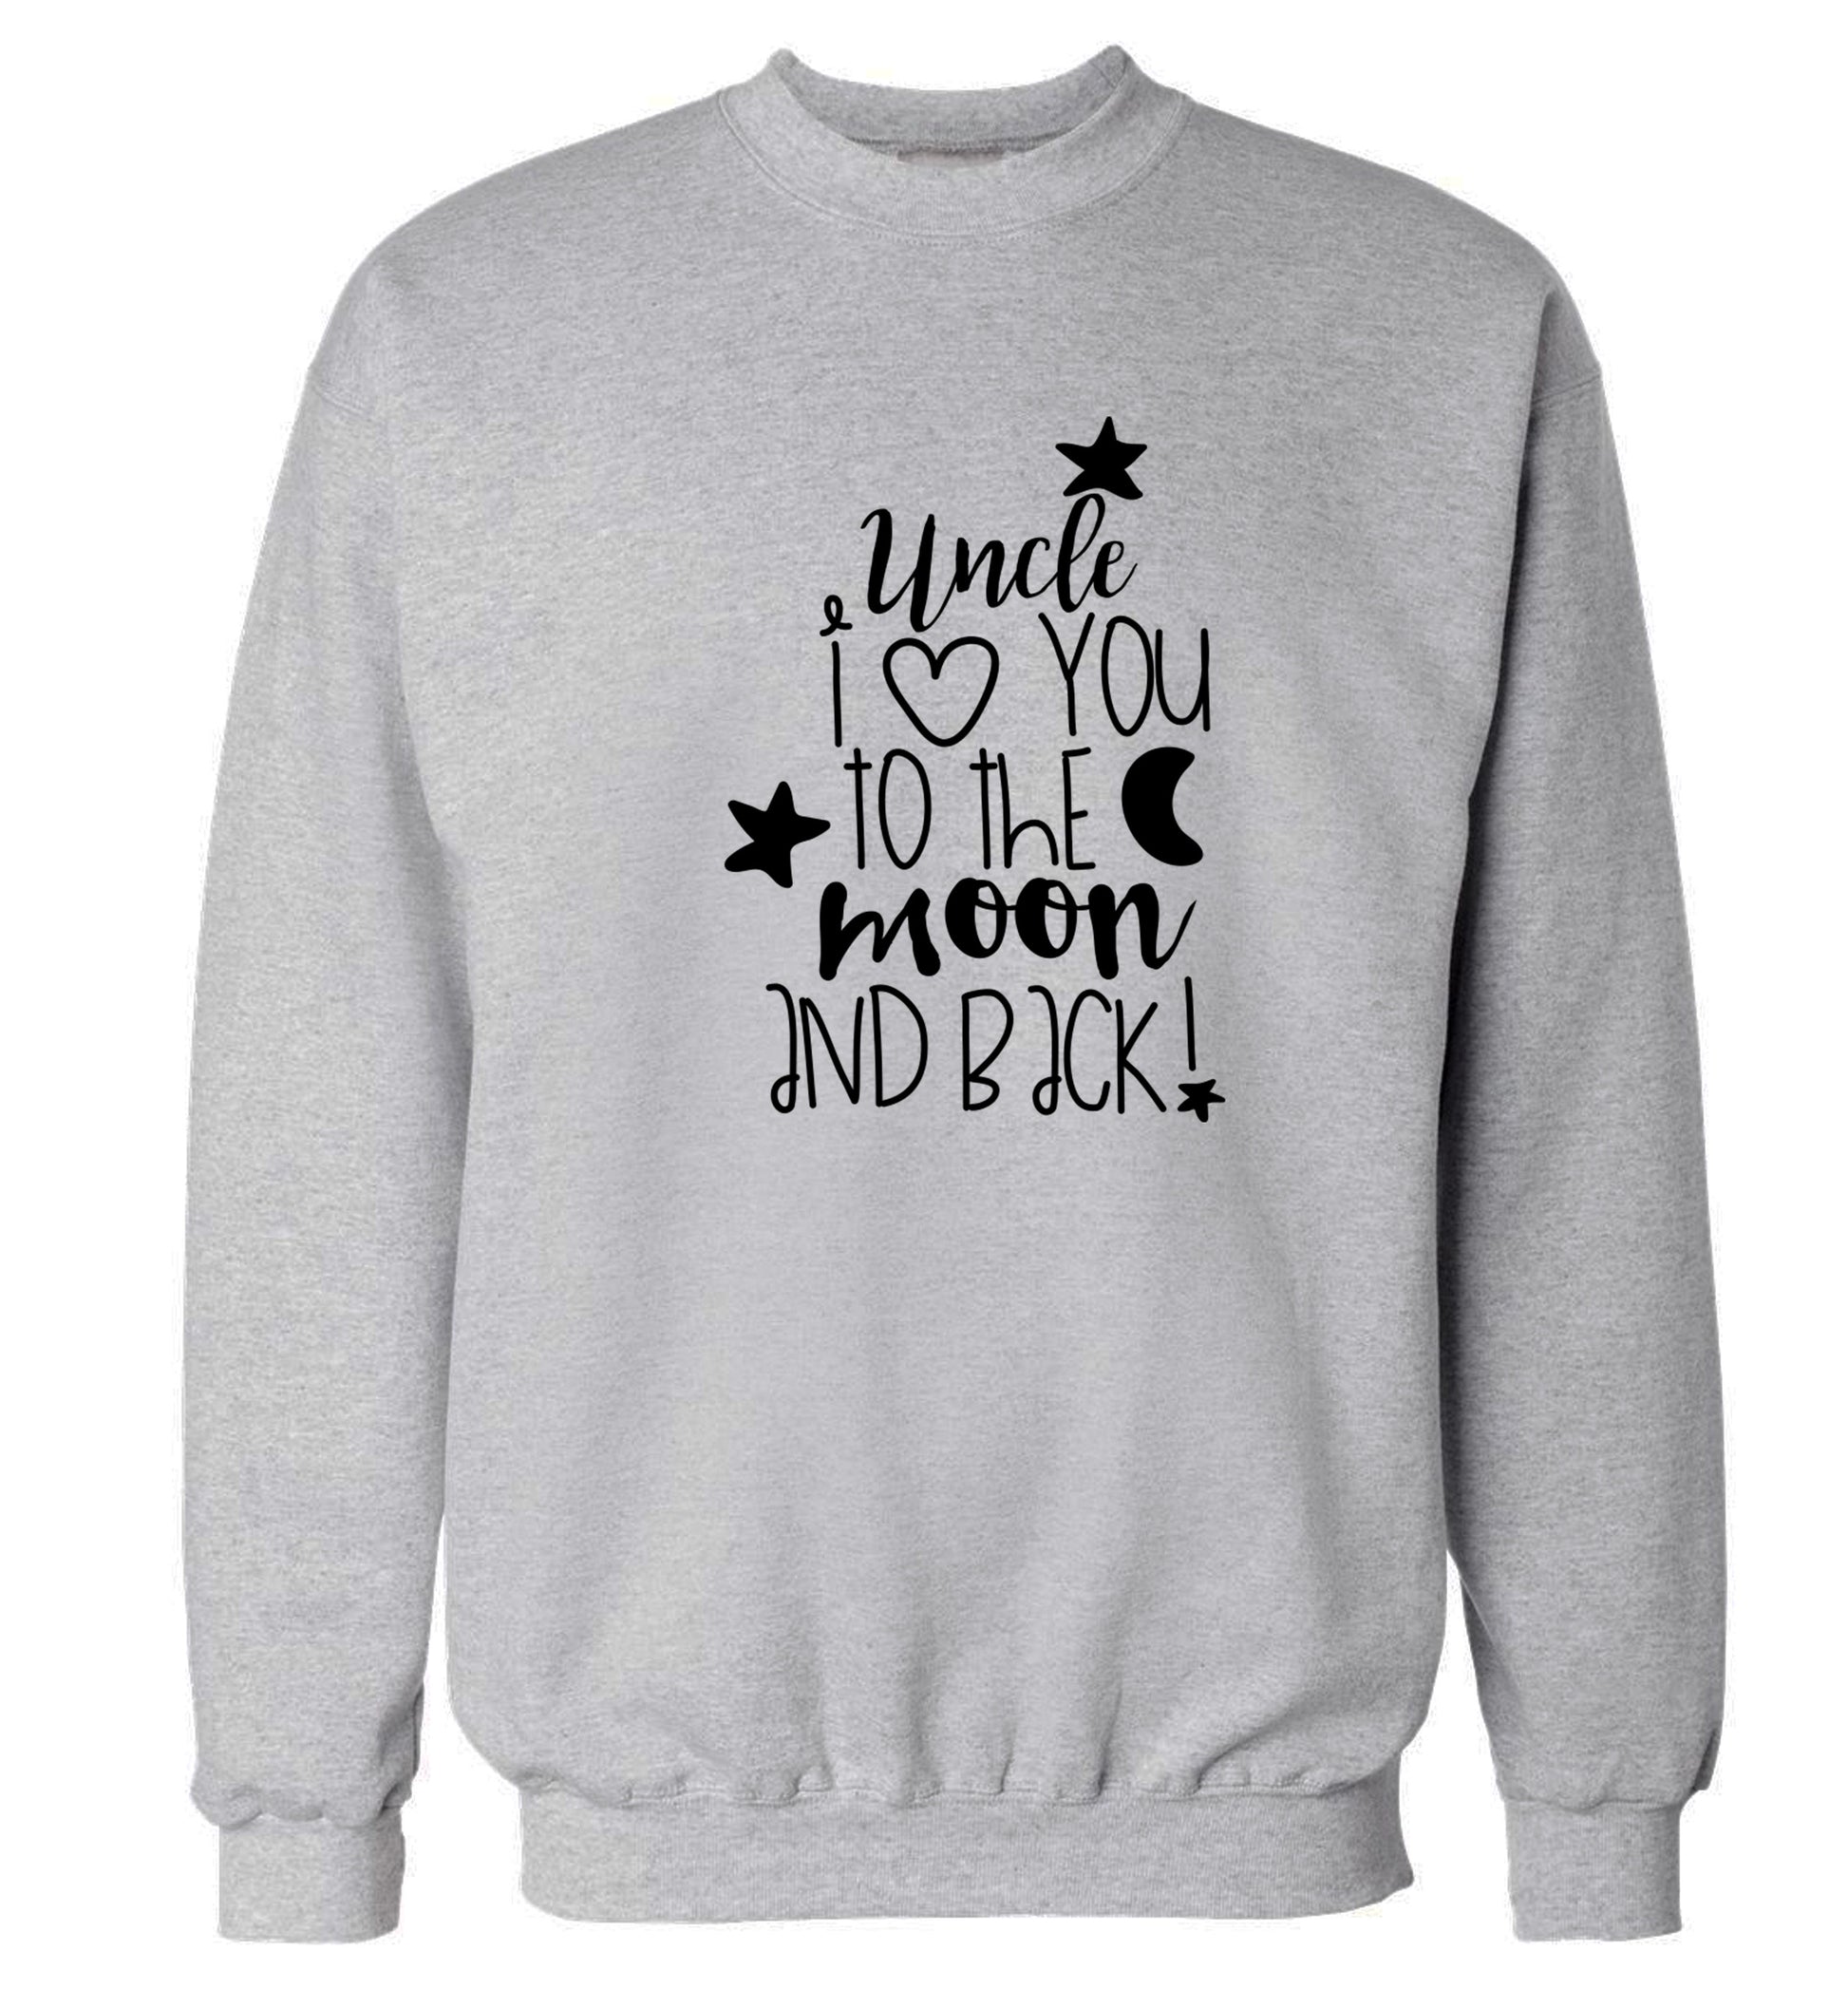 Uncle I love you to the moon and back Adult's unisex grey  sweater 2XL